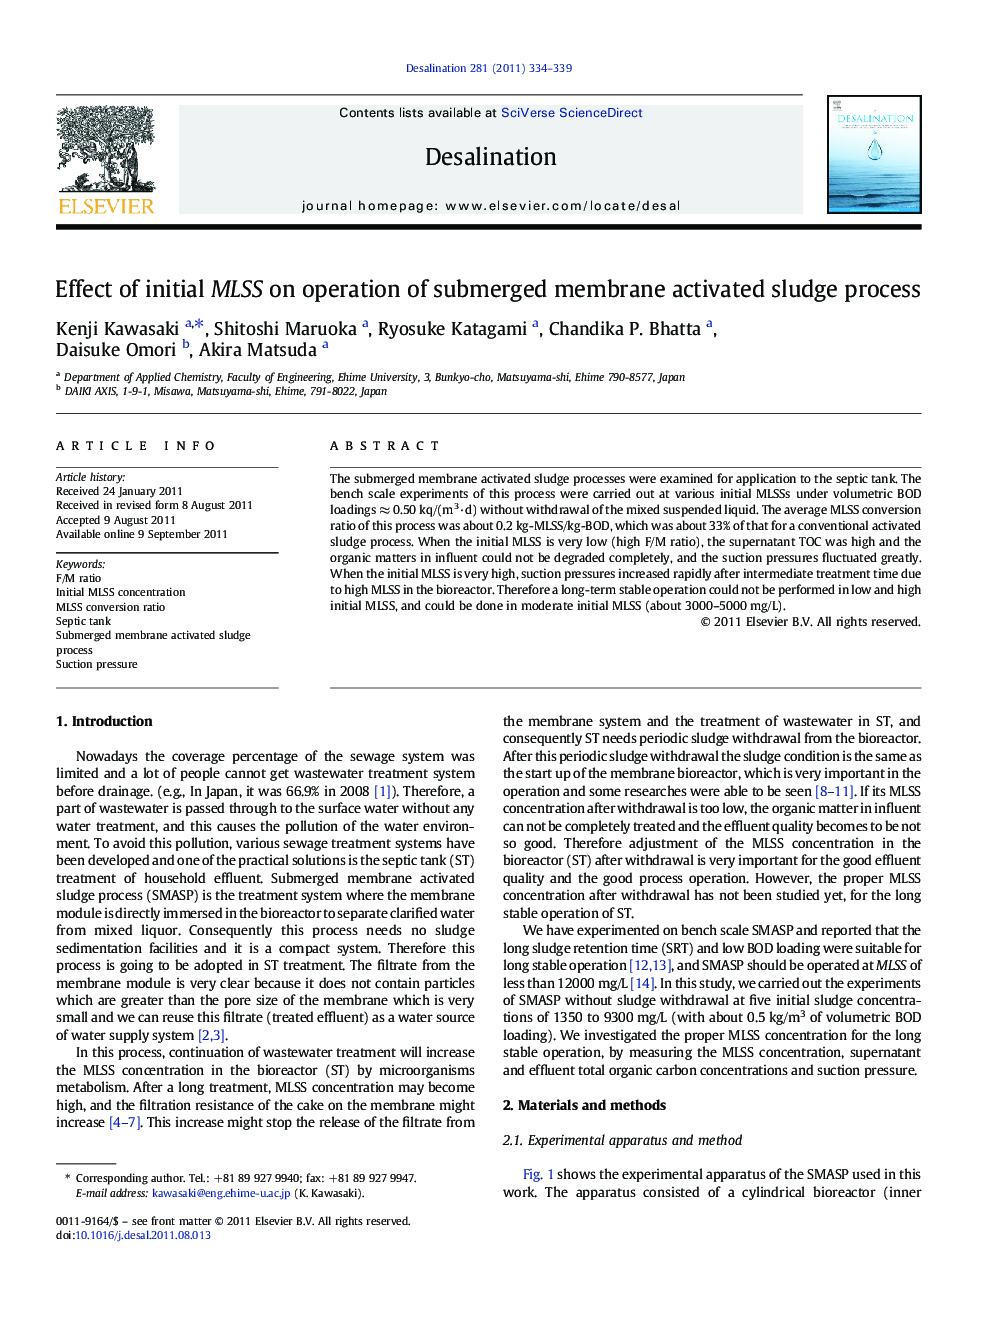 Effect of initial MLSS on operation of submerged membrane activated sludge process